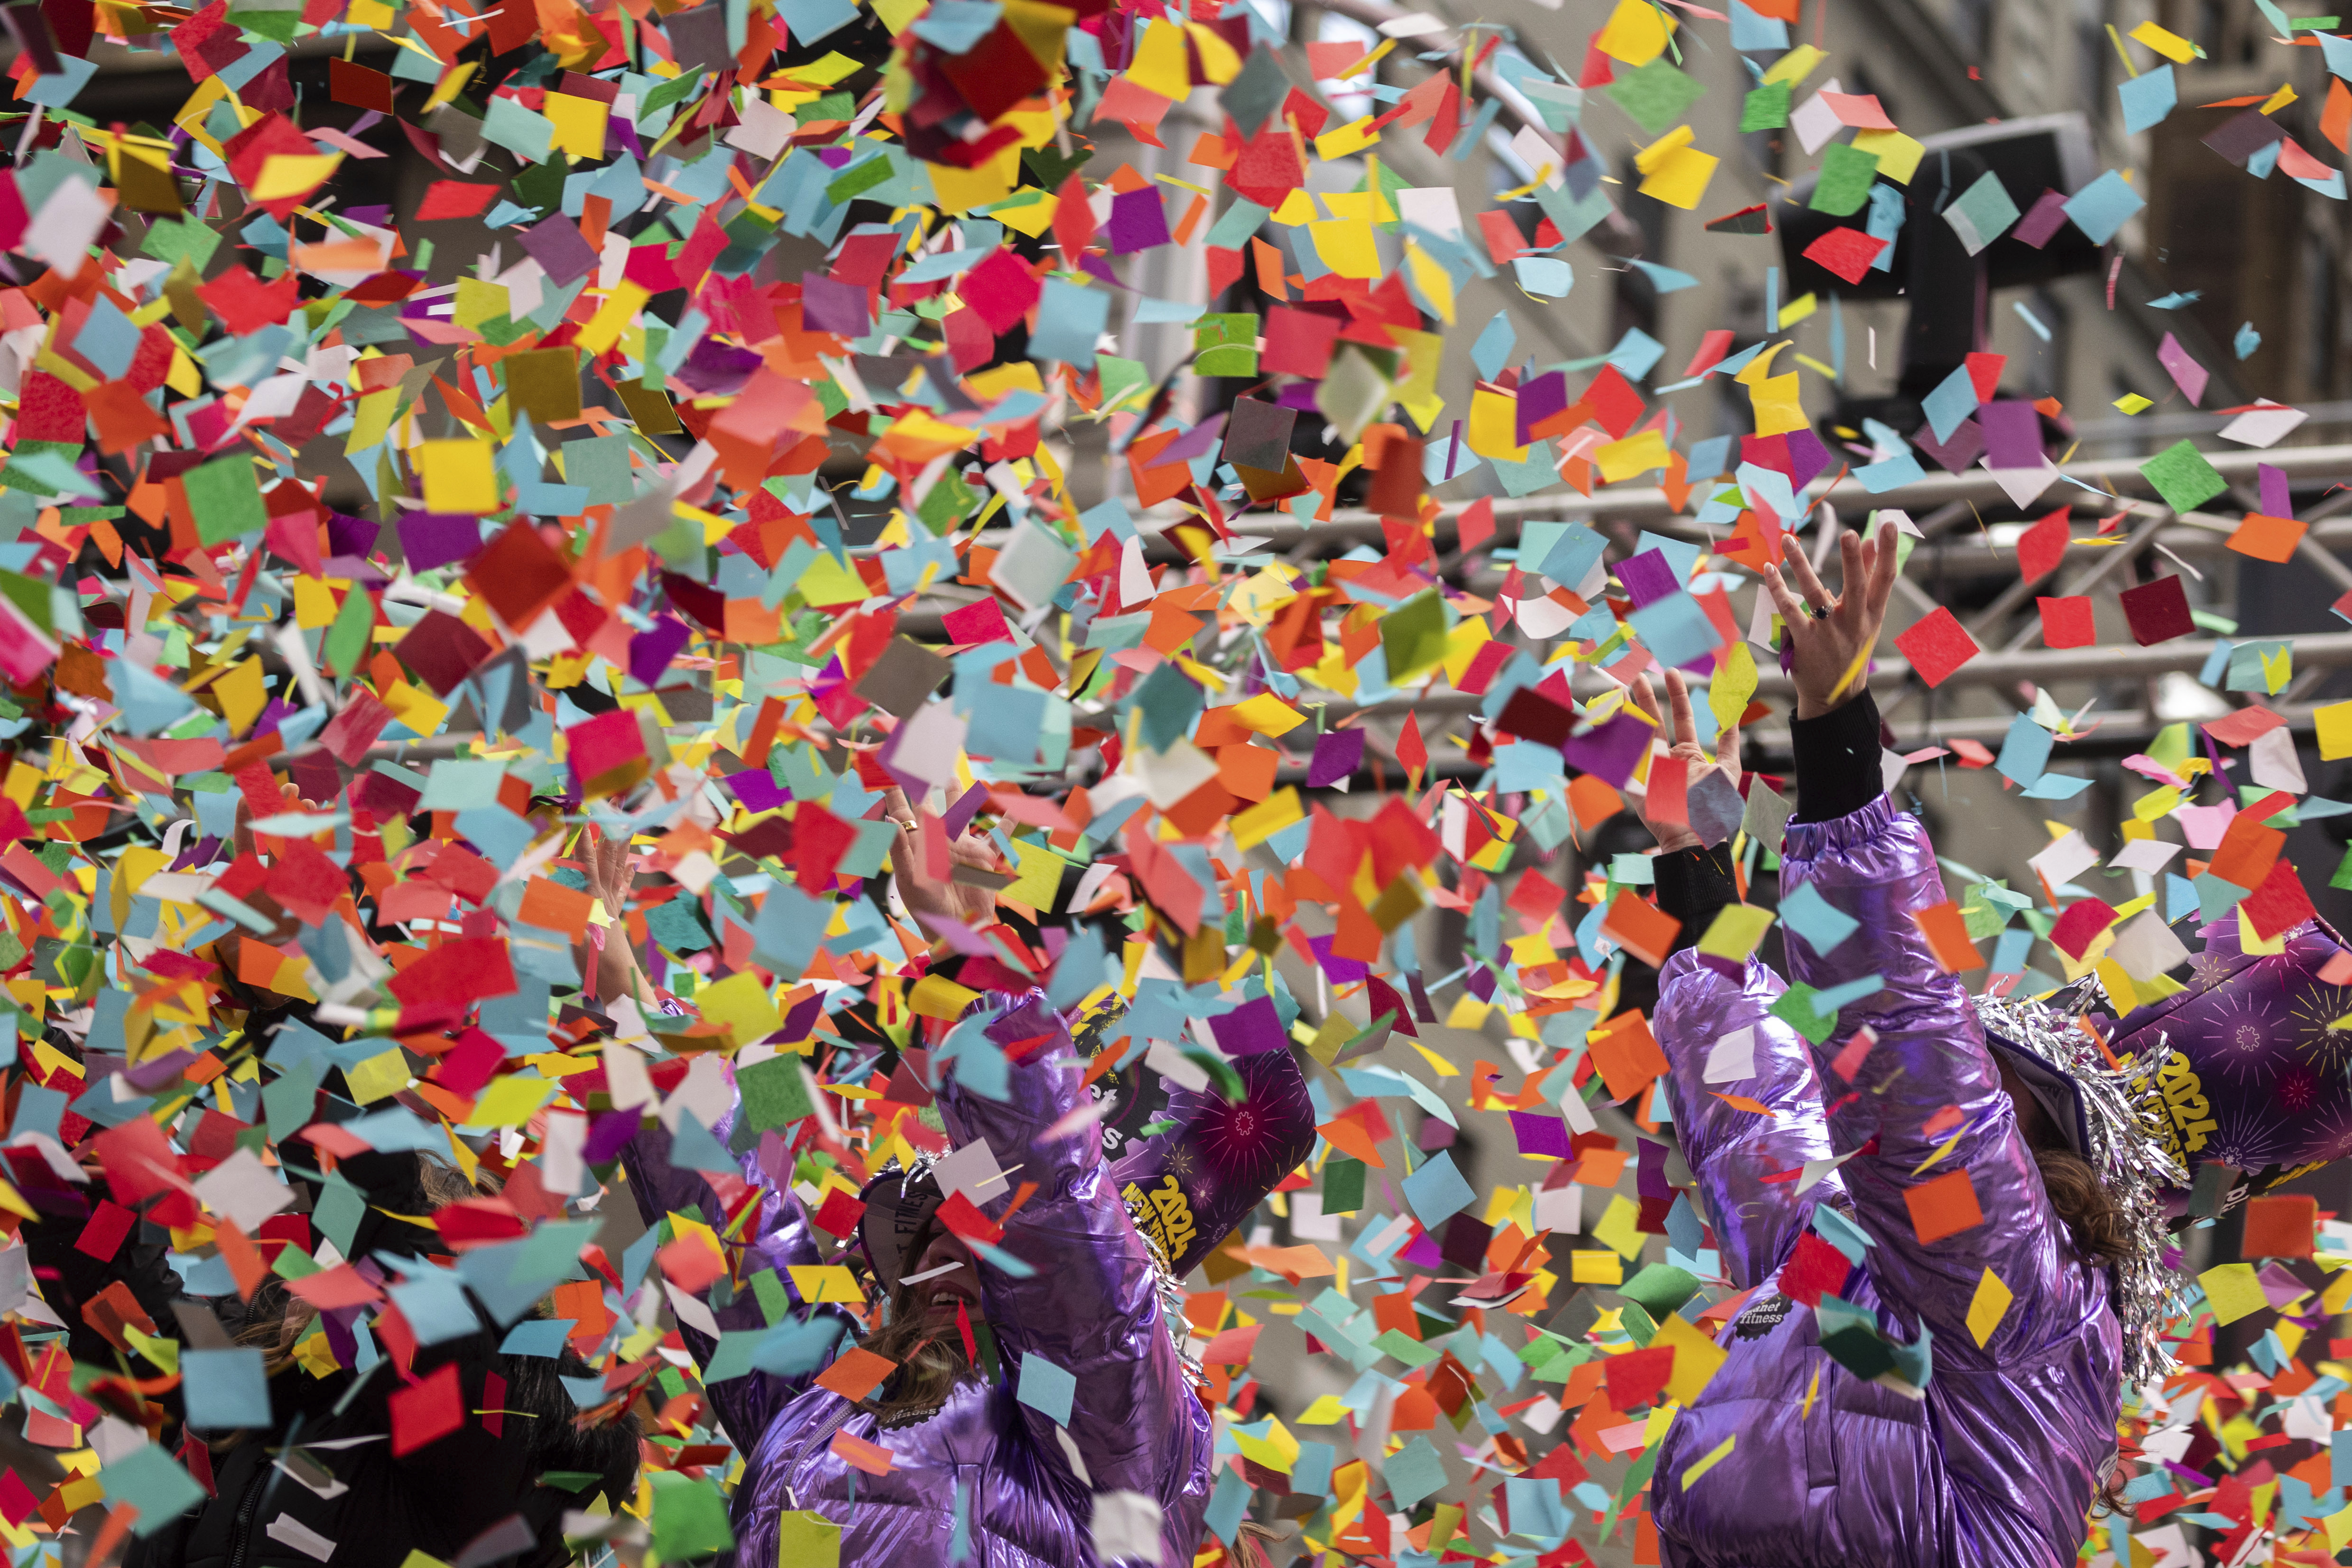 Organizers test confetti drop ahead of New Year's Eve in Times